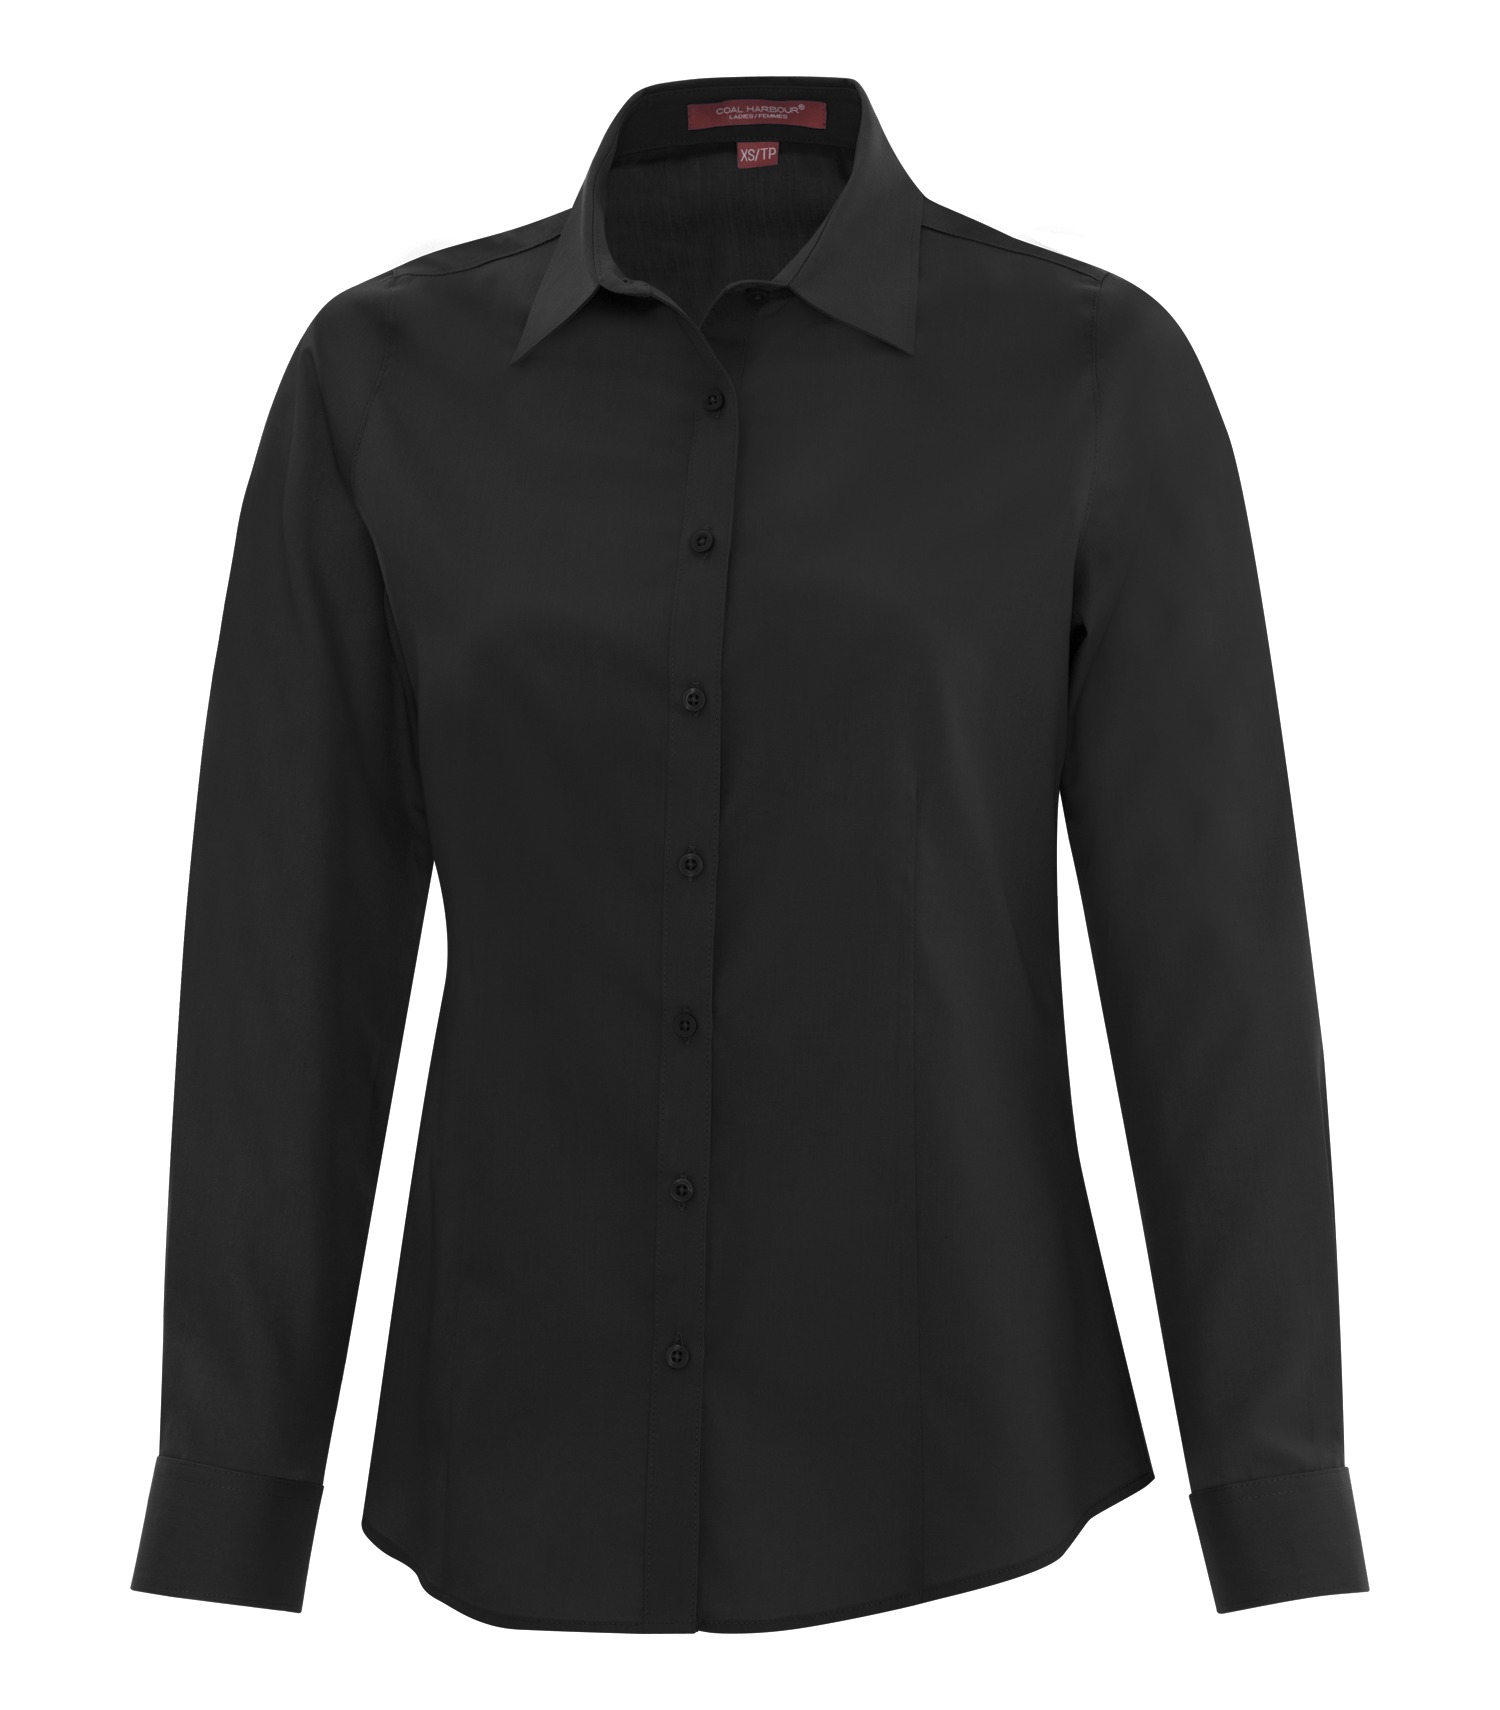 COAL HARBOUR® EVERYDAY LONG SLEEVE WOVEN LADIES' SHIRT. L6013